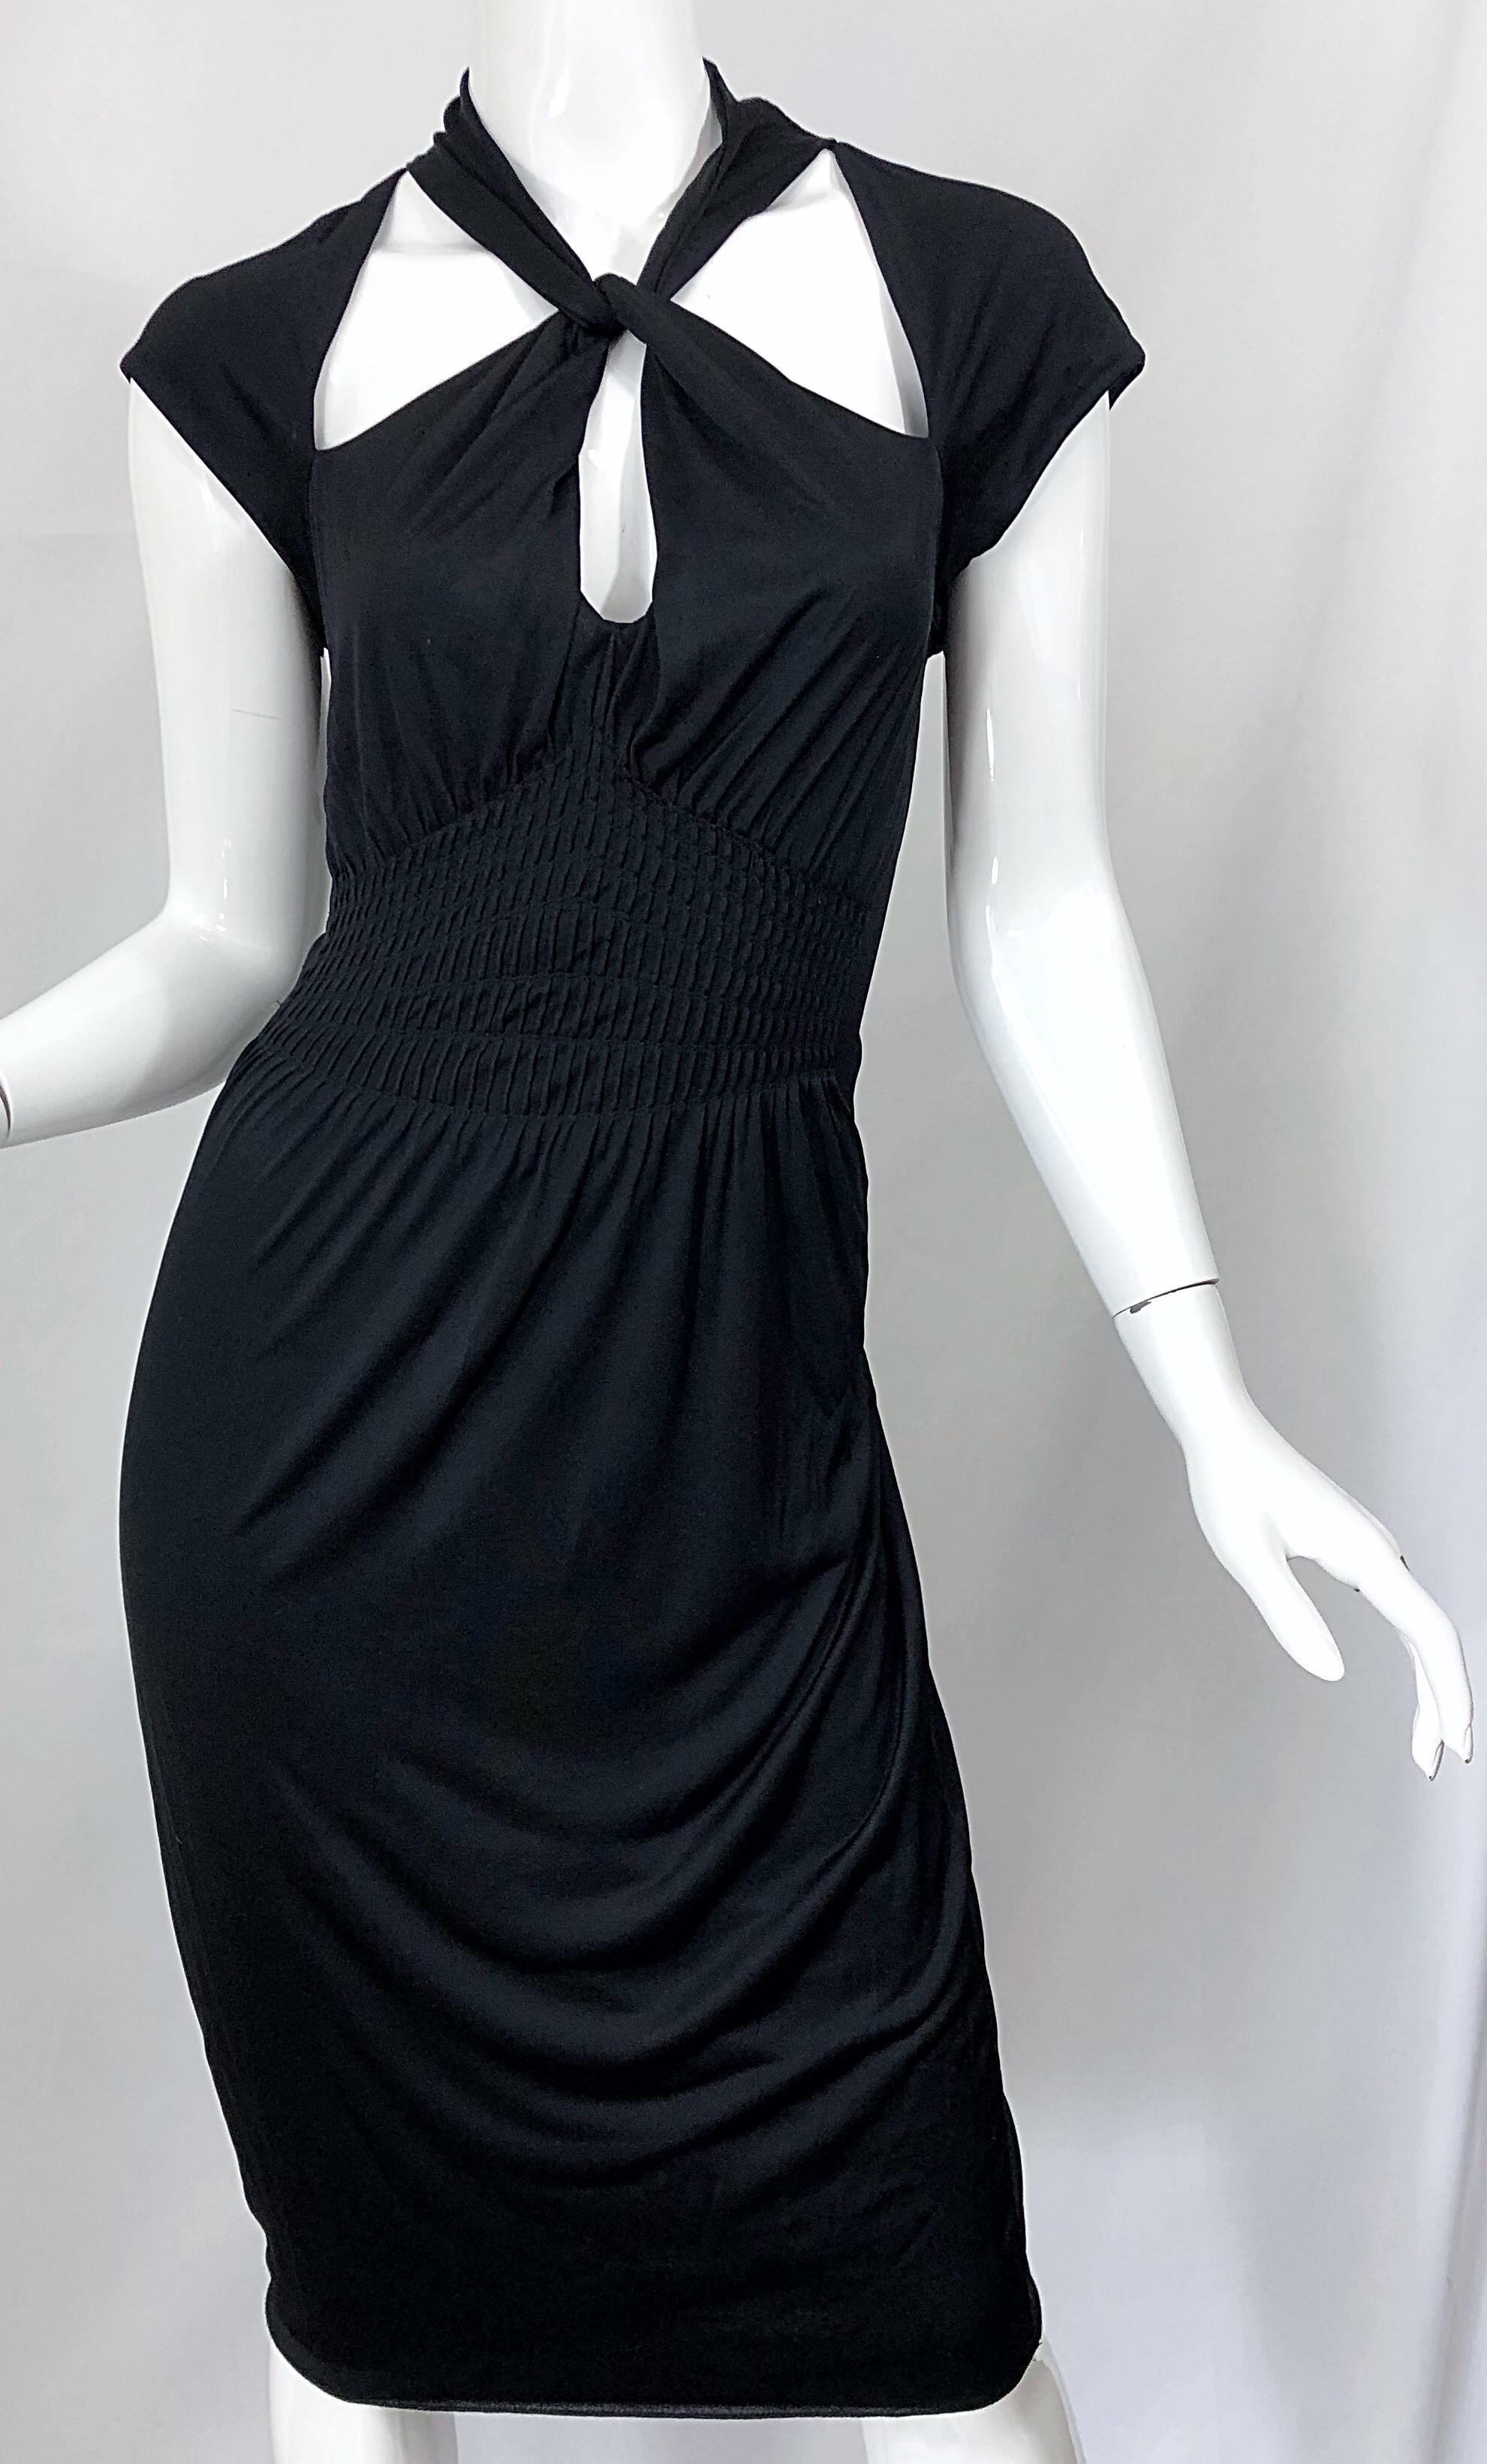 Women's Gucci Tom Ford Fall 2003 Runway Black Cut Out Backless Stretch Jersey Dress 